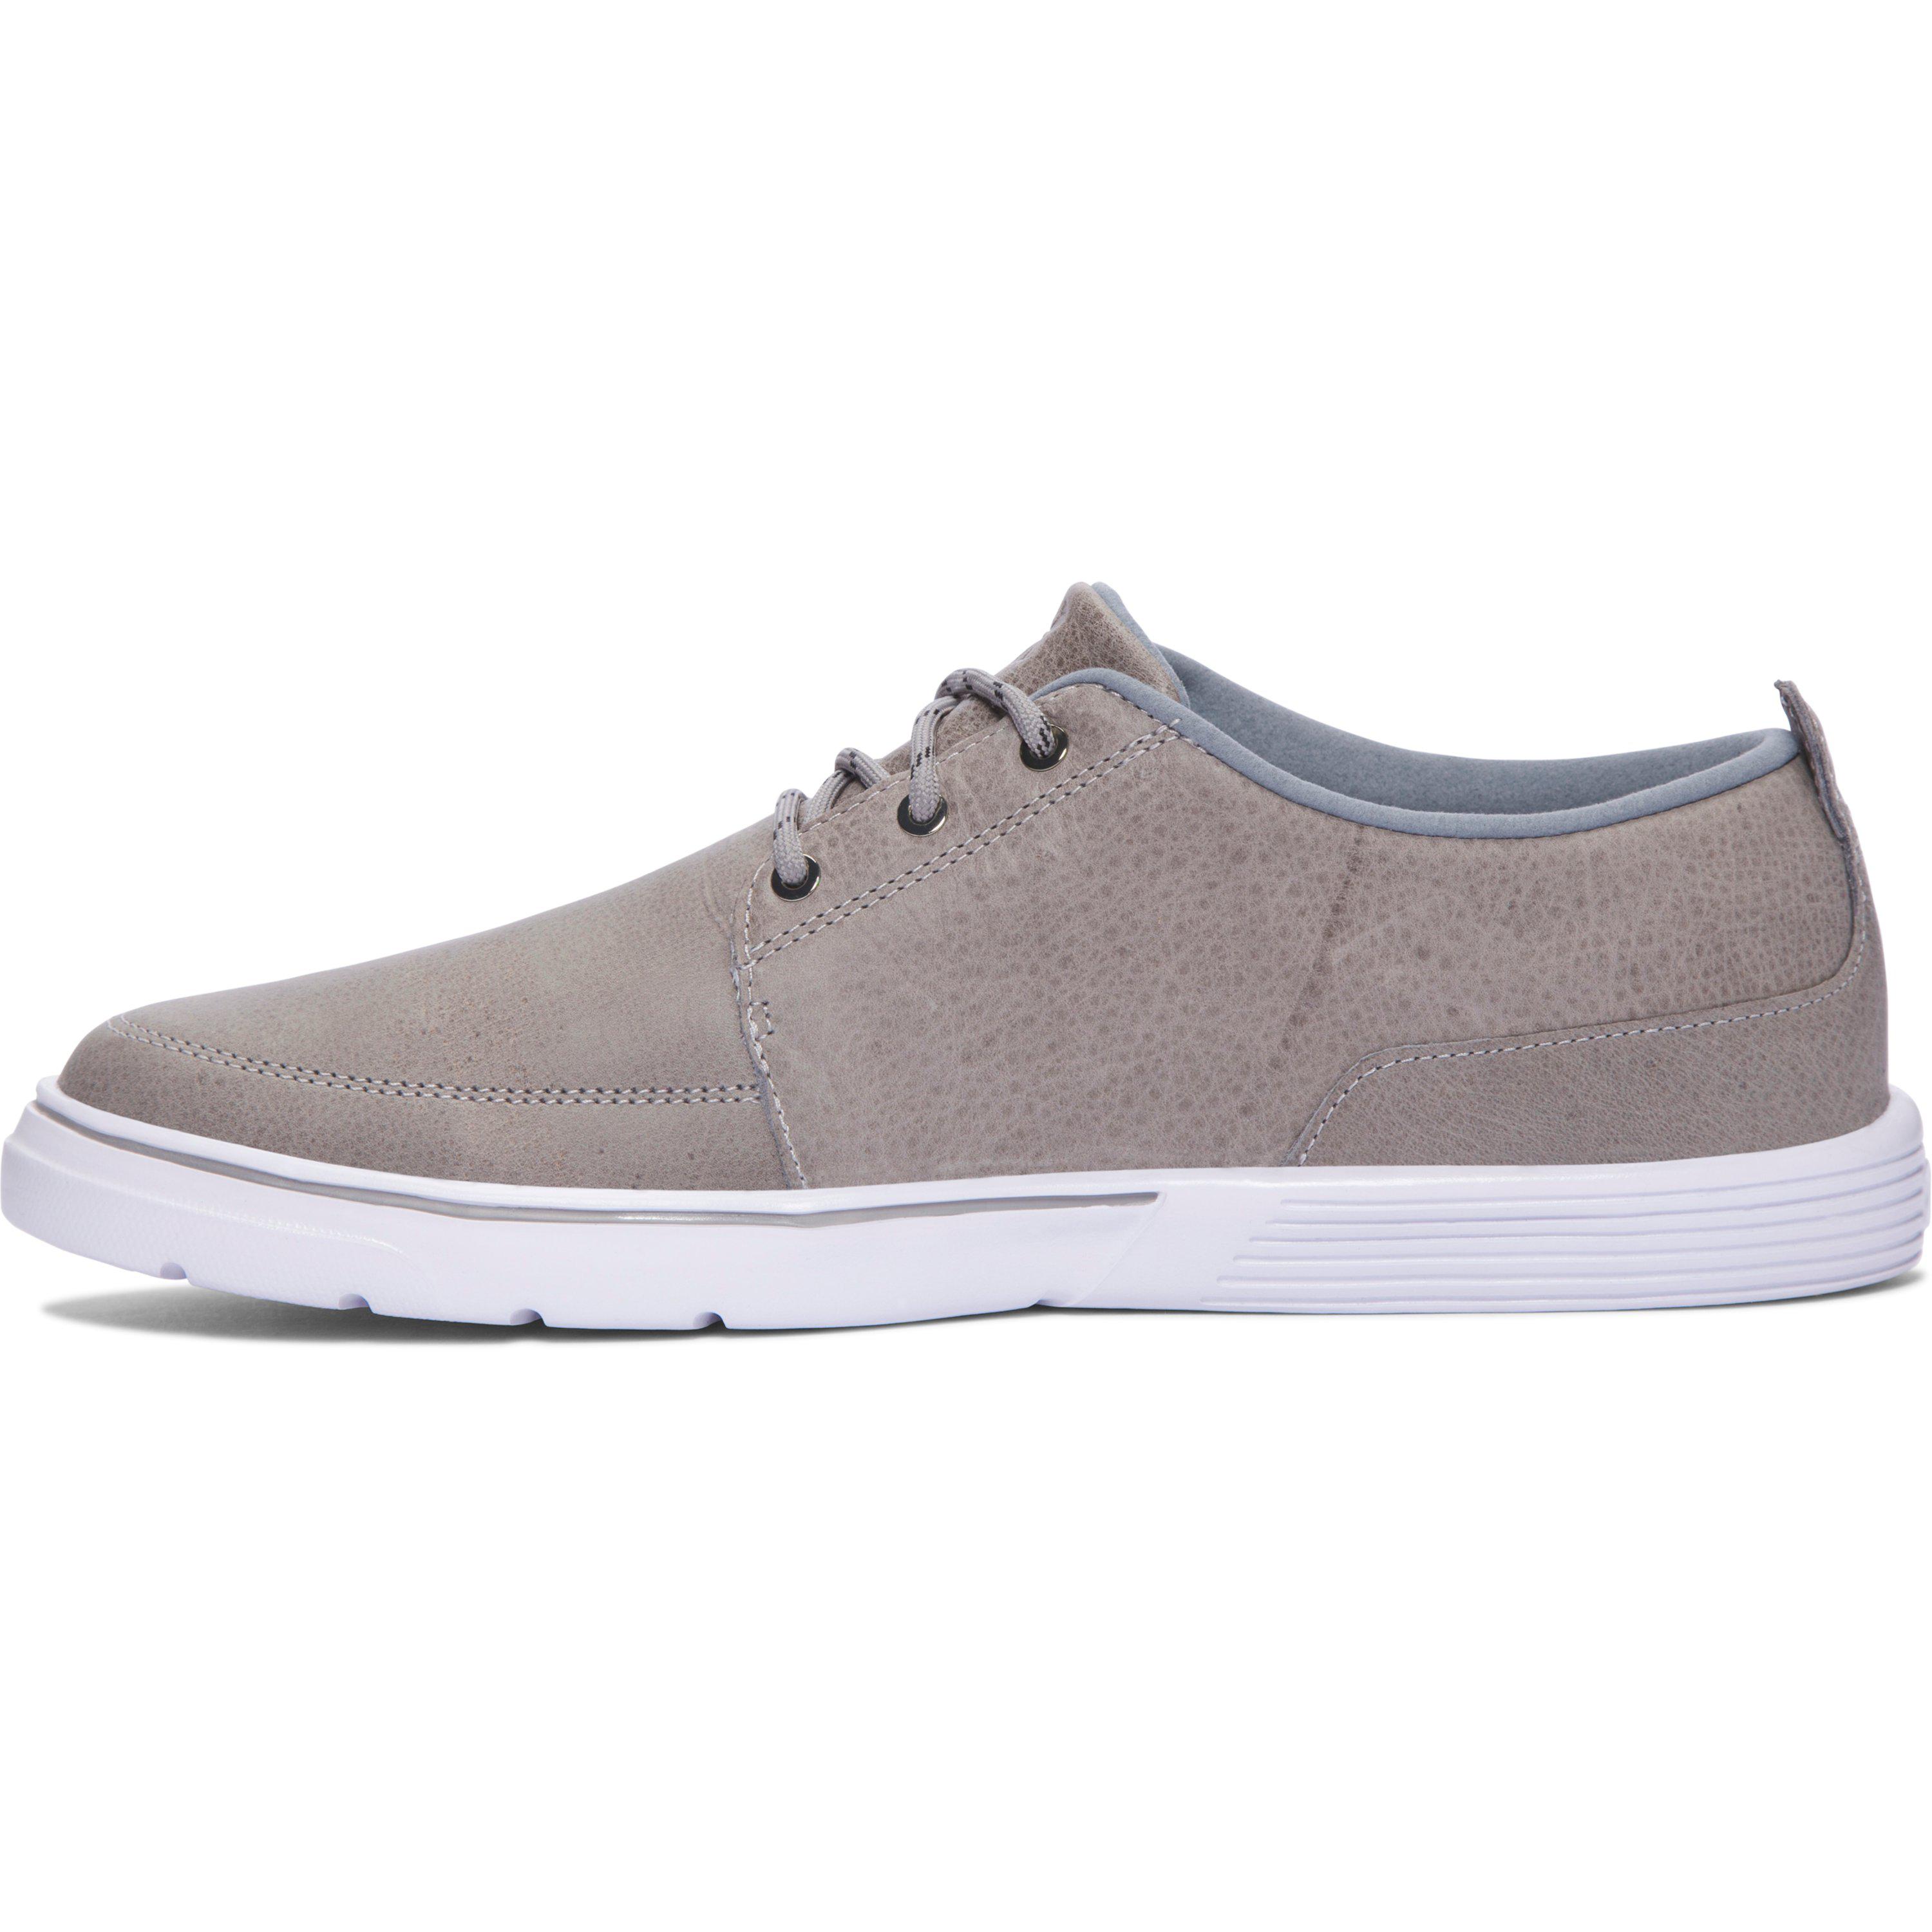 Under Armour Men's Ua Street Encounter Iii Leather Shoes in Gray for ...